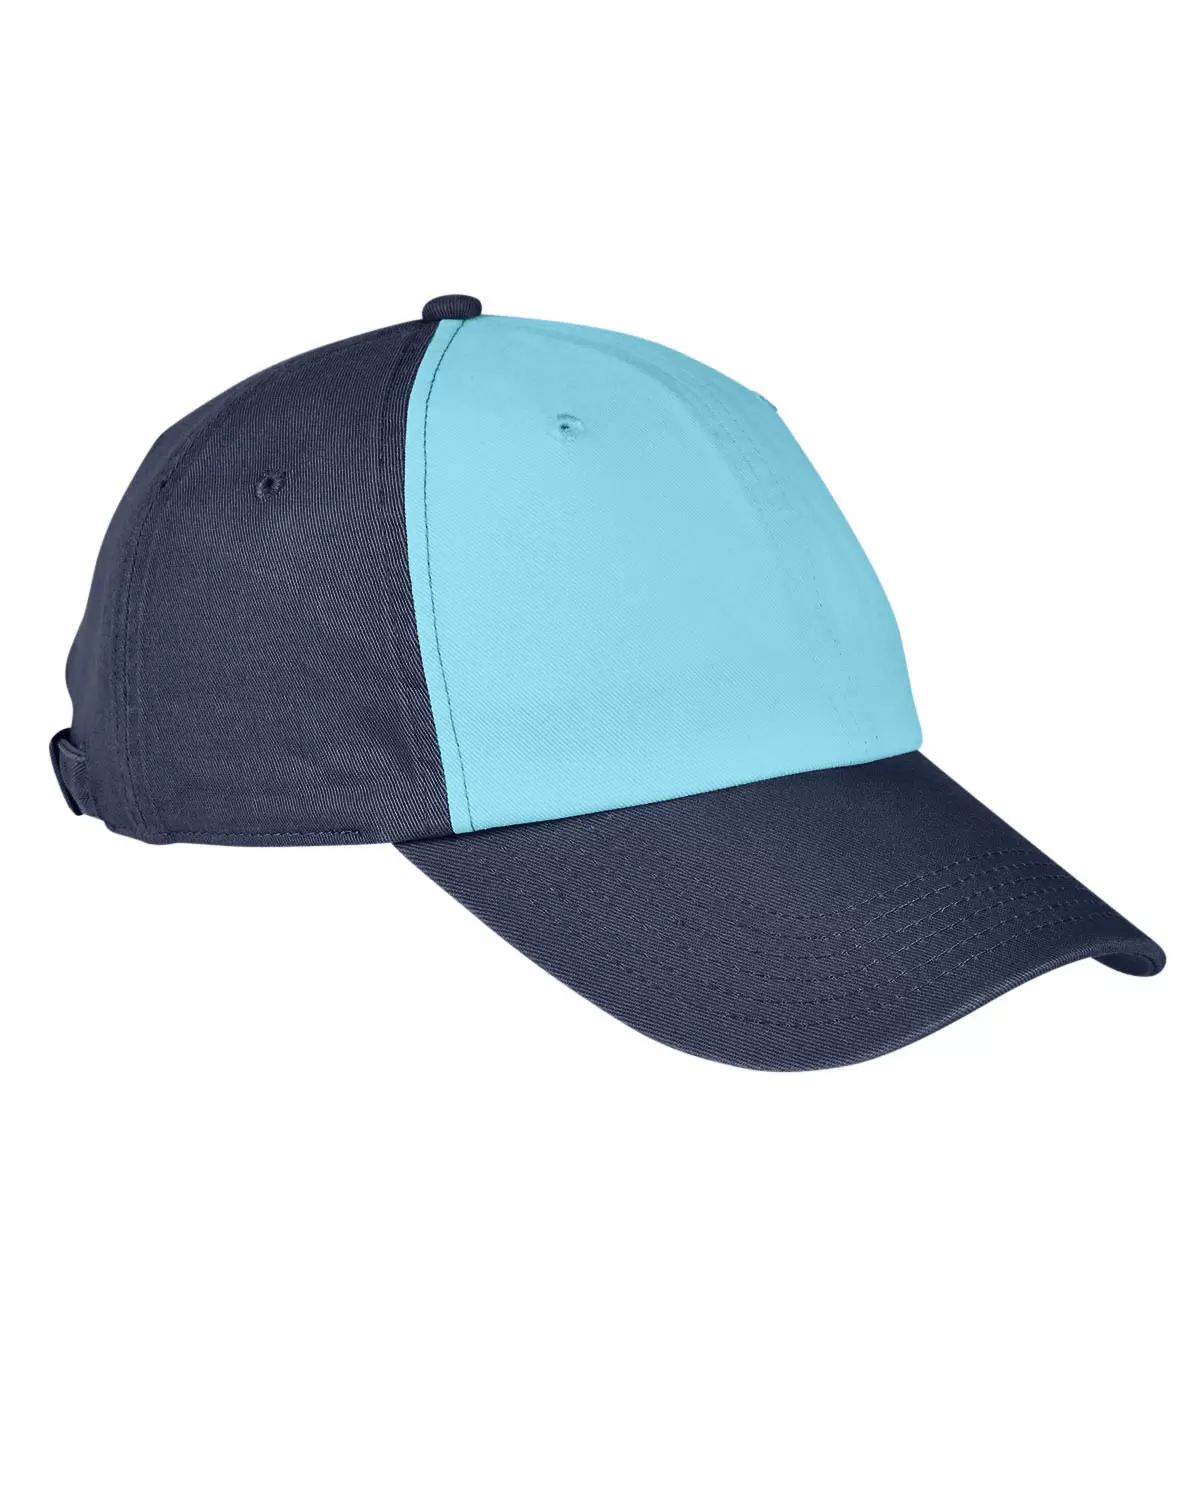 Big Accessories BA650 100% Washed Cotton Twill Baseball Cap - From